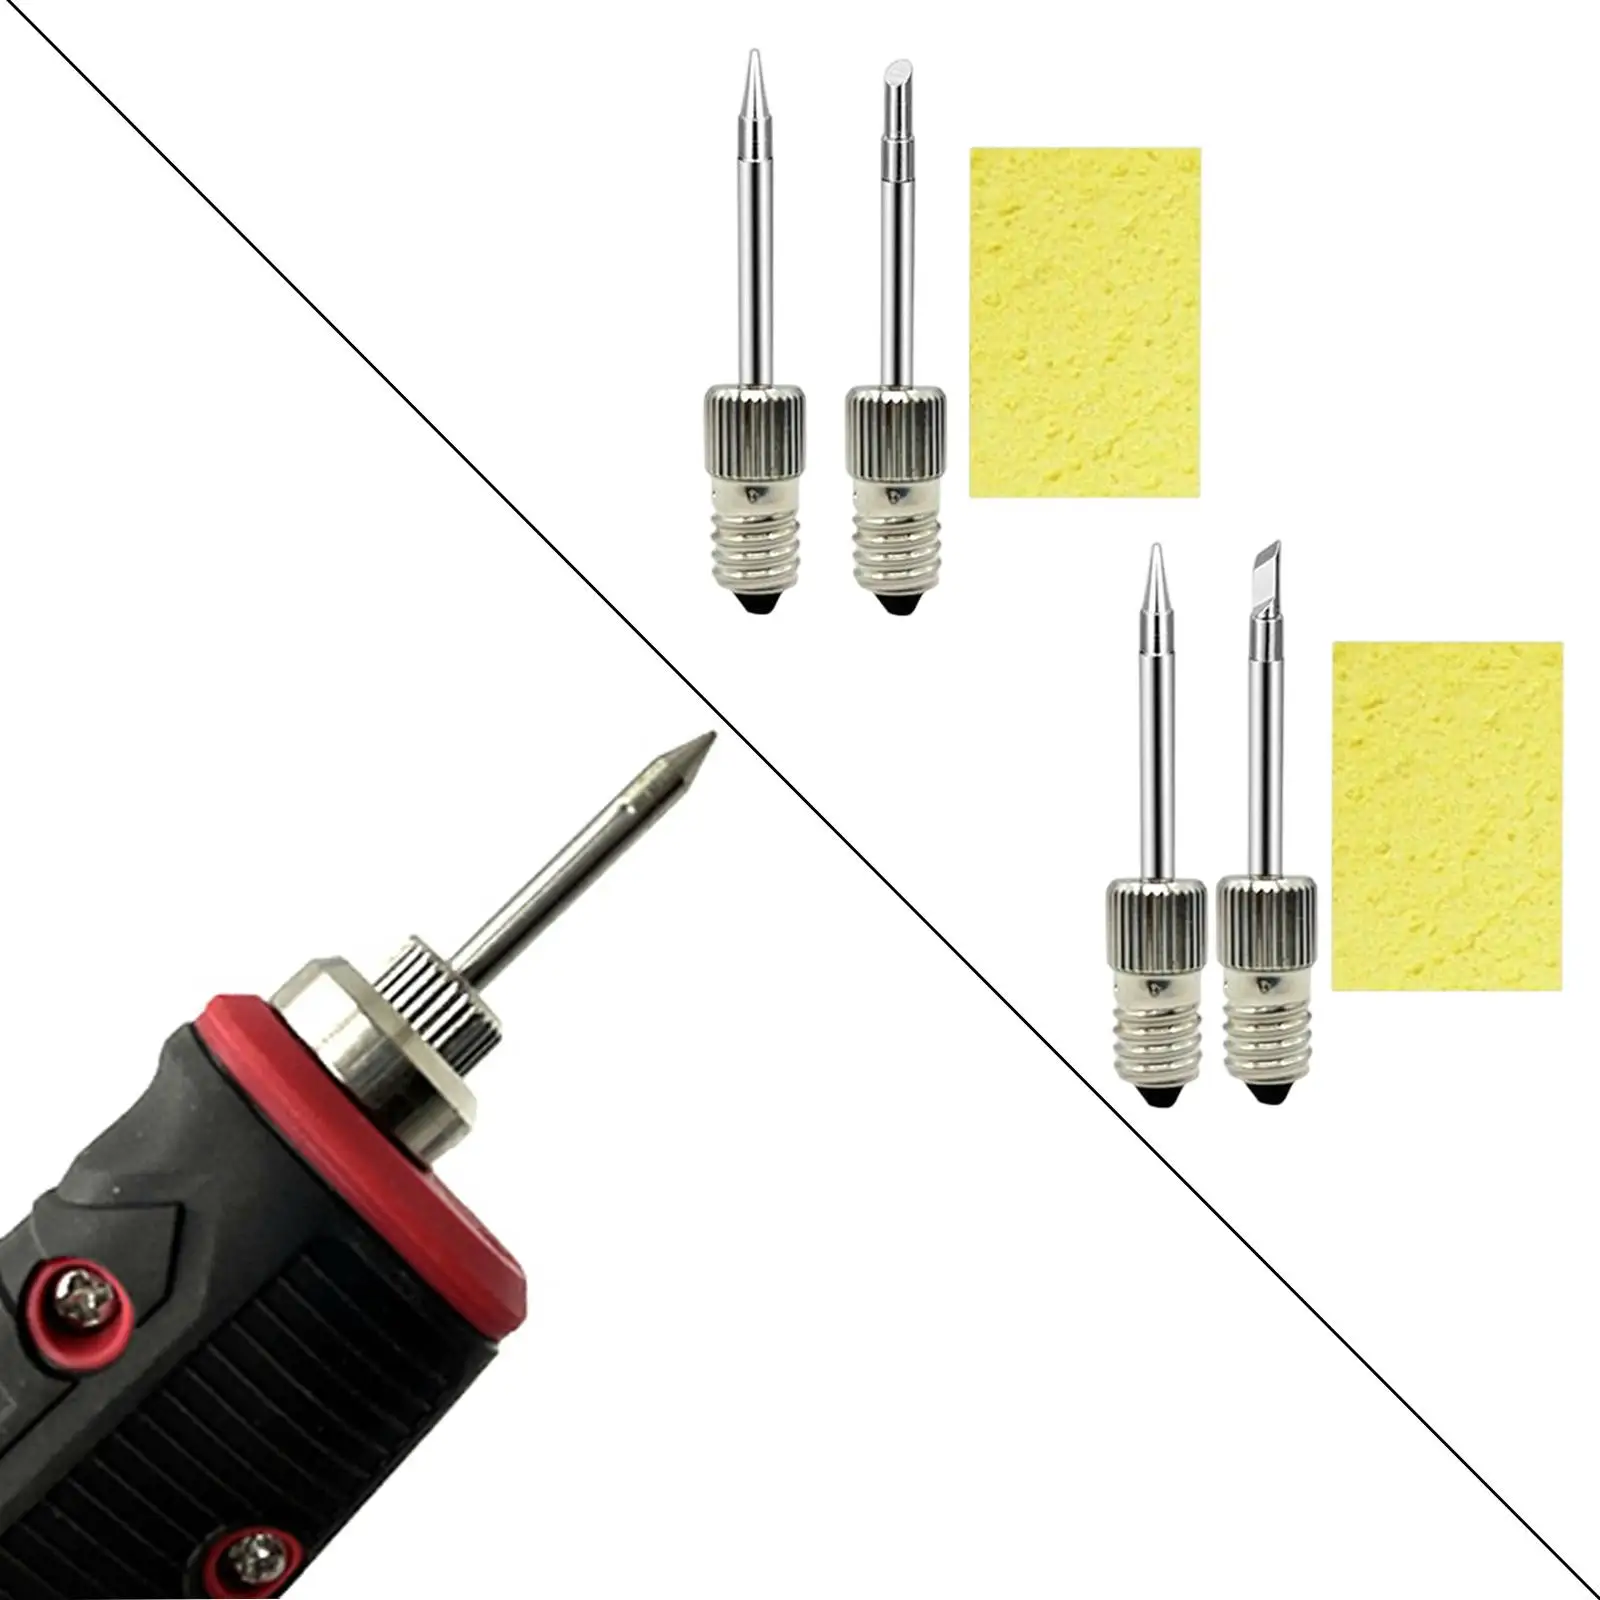 Copper Soldering Iron Tips Kit Soldering Iron Tips Replacement Parts Welding Soldering Tips for E10 Interface Soldering Station